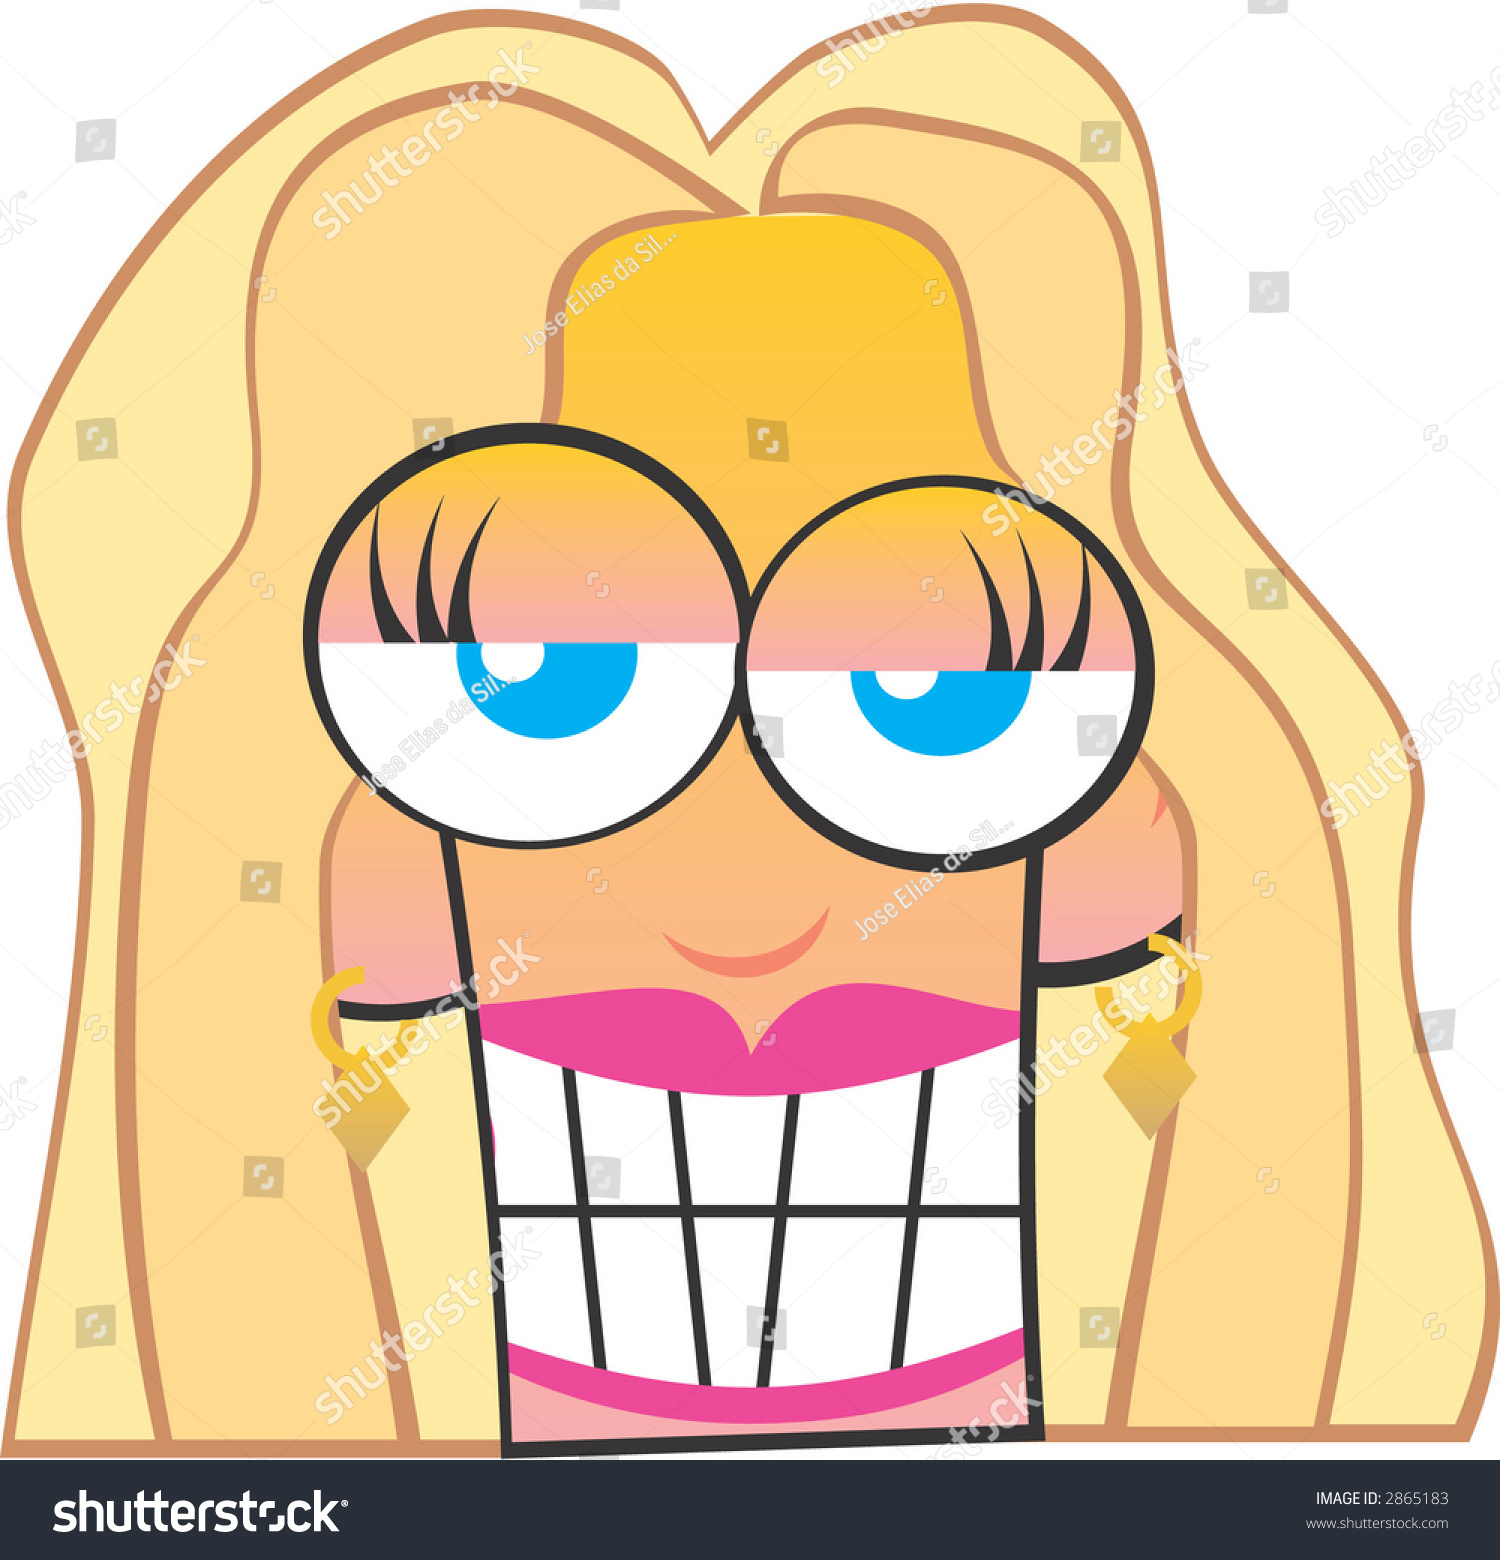 ugly clipart images - photo #16